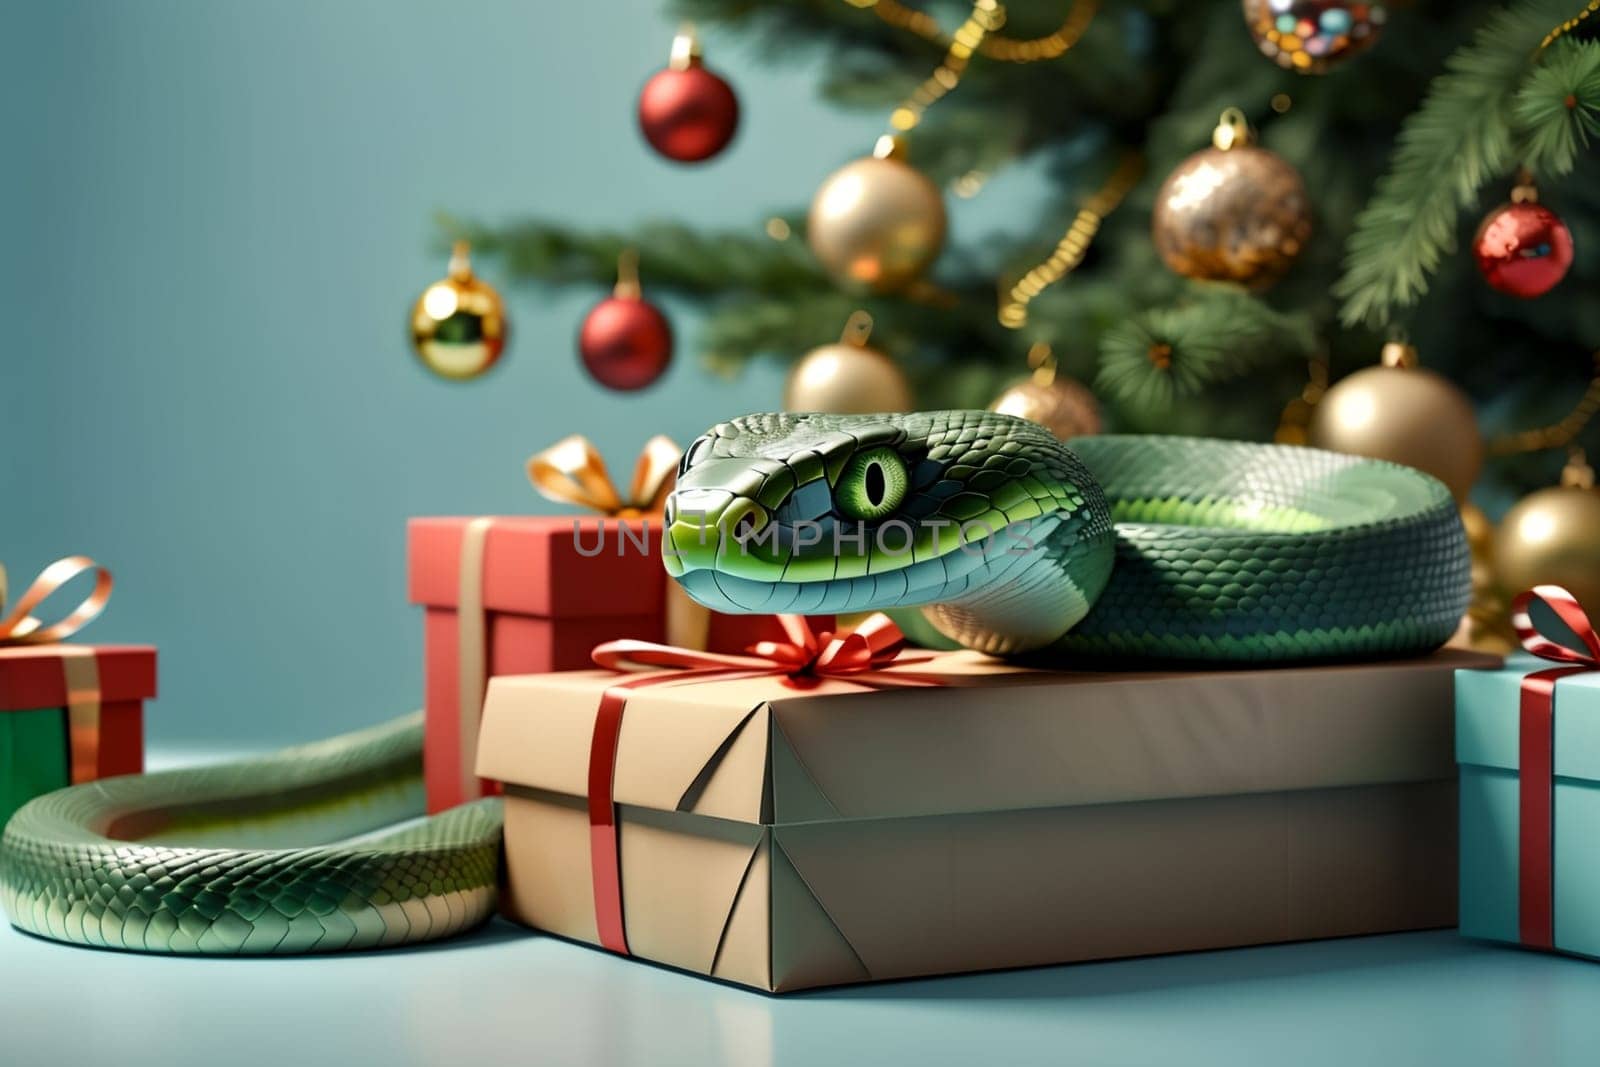 New Year snake with gifts under the Christmas tree, New Year card by Rawlik